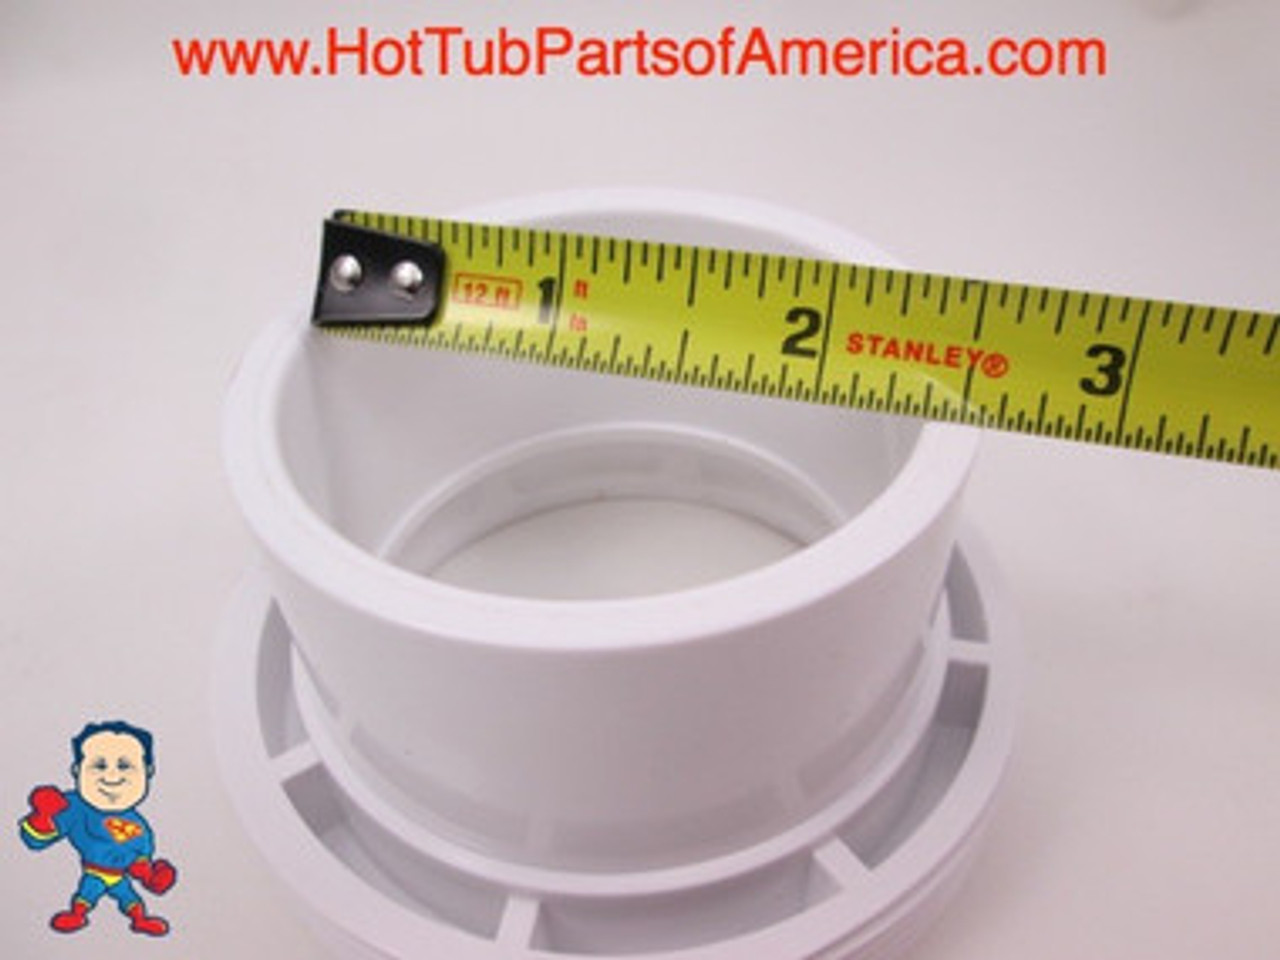 Hot Tub Spa 2 1/2" X 2" Slip Heater Union & Gasket How to Video